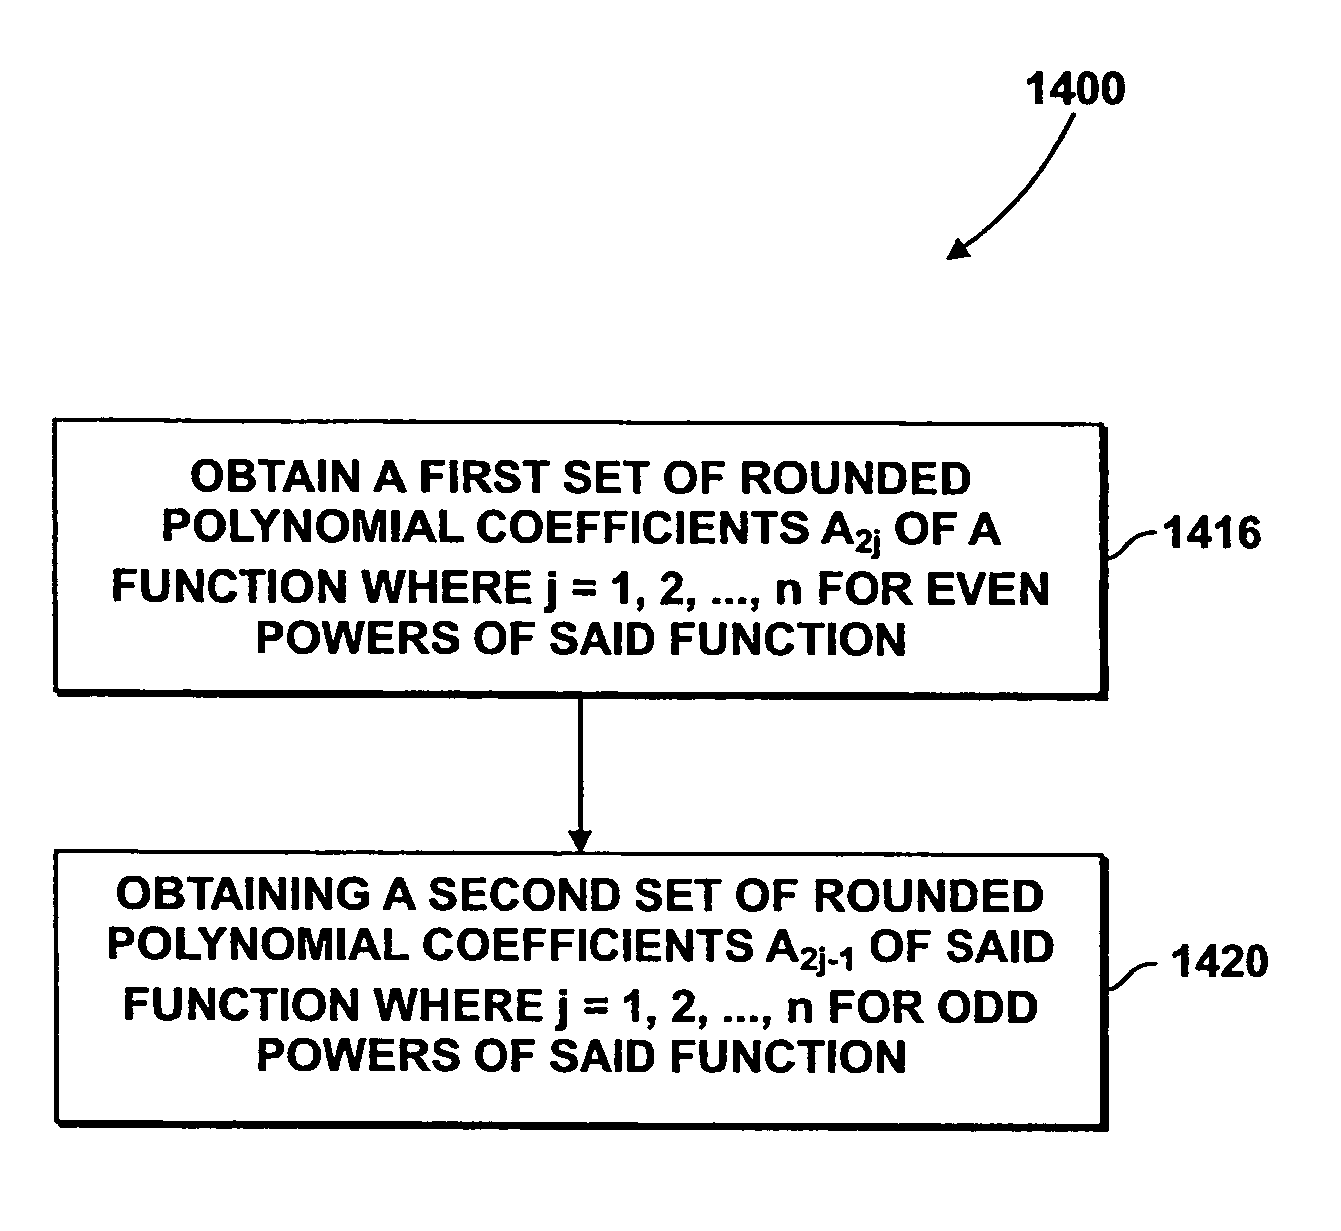 Apparatus and method for minimizing accumulated rounding errors in coefficient values in a lookup table for interpolating polynomials